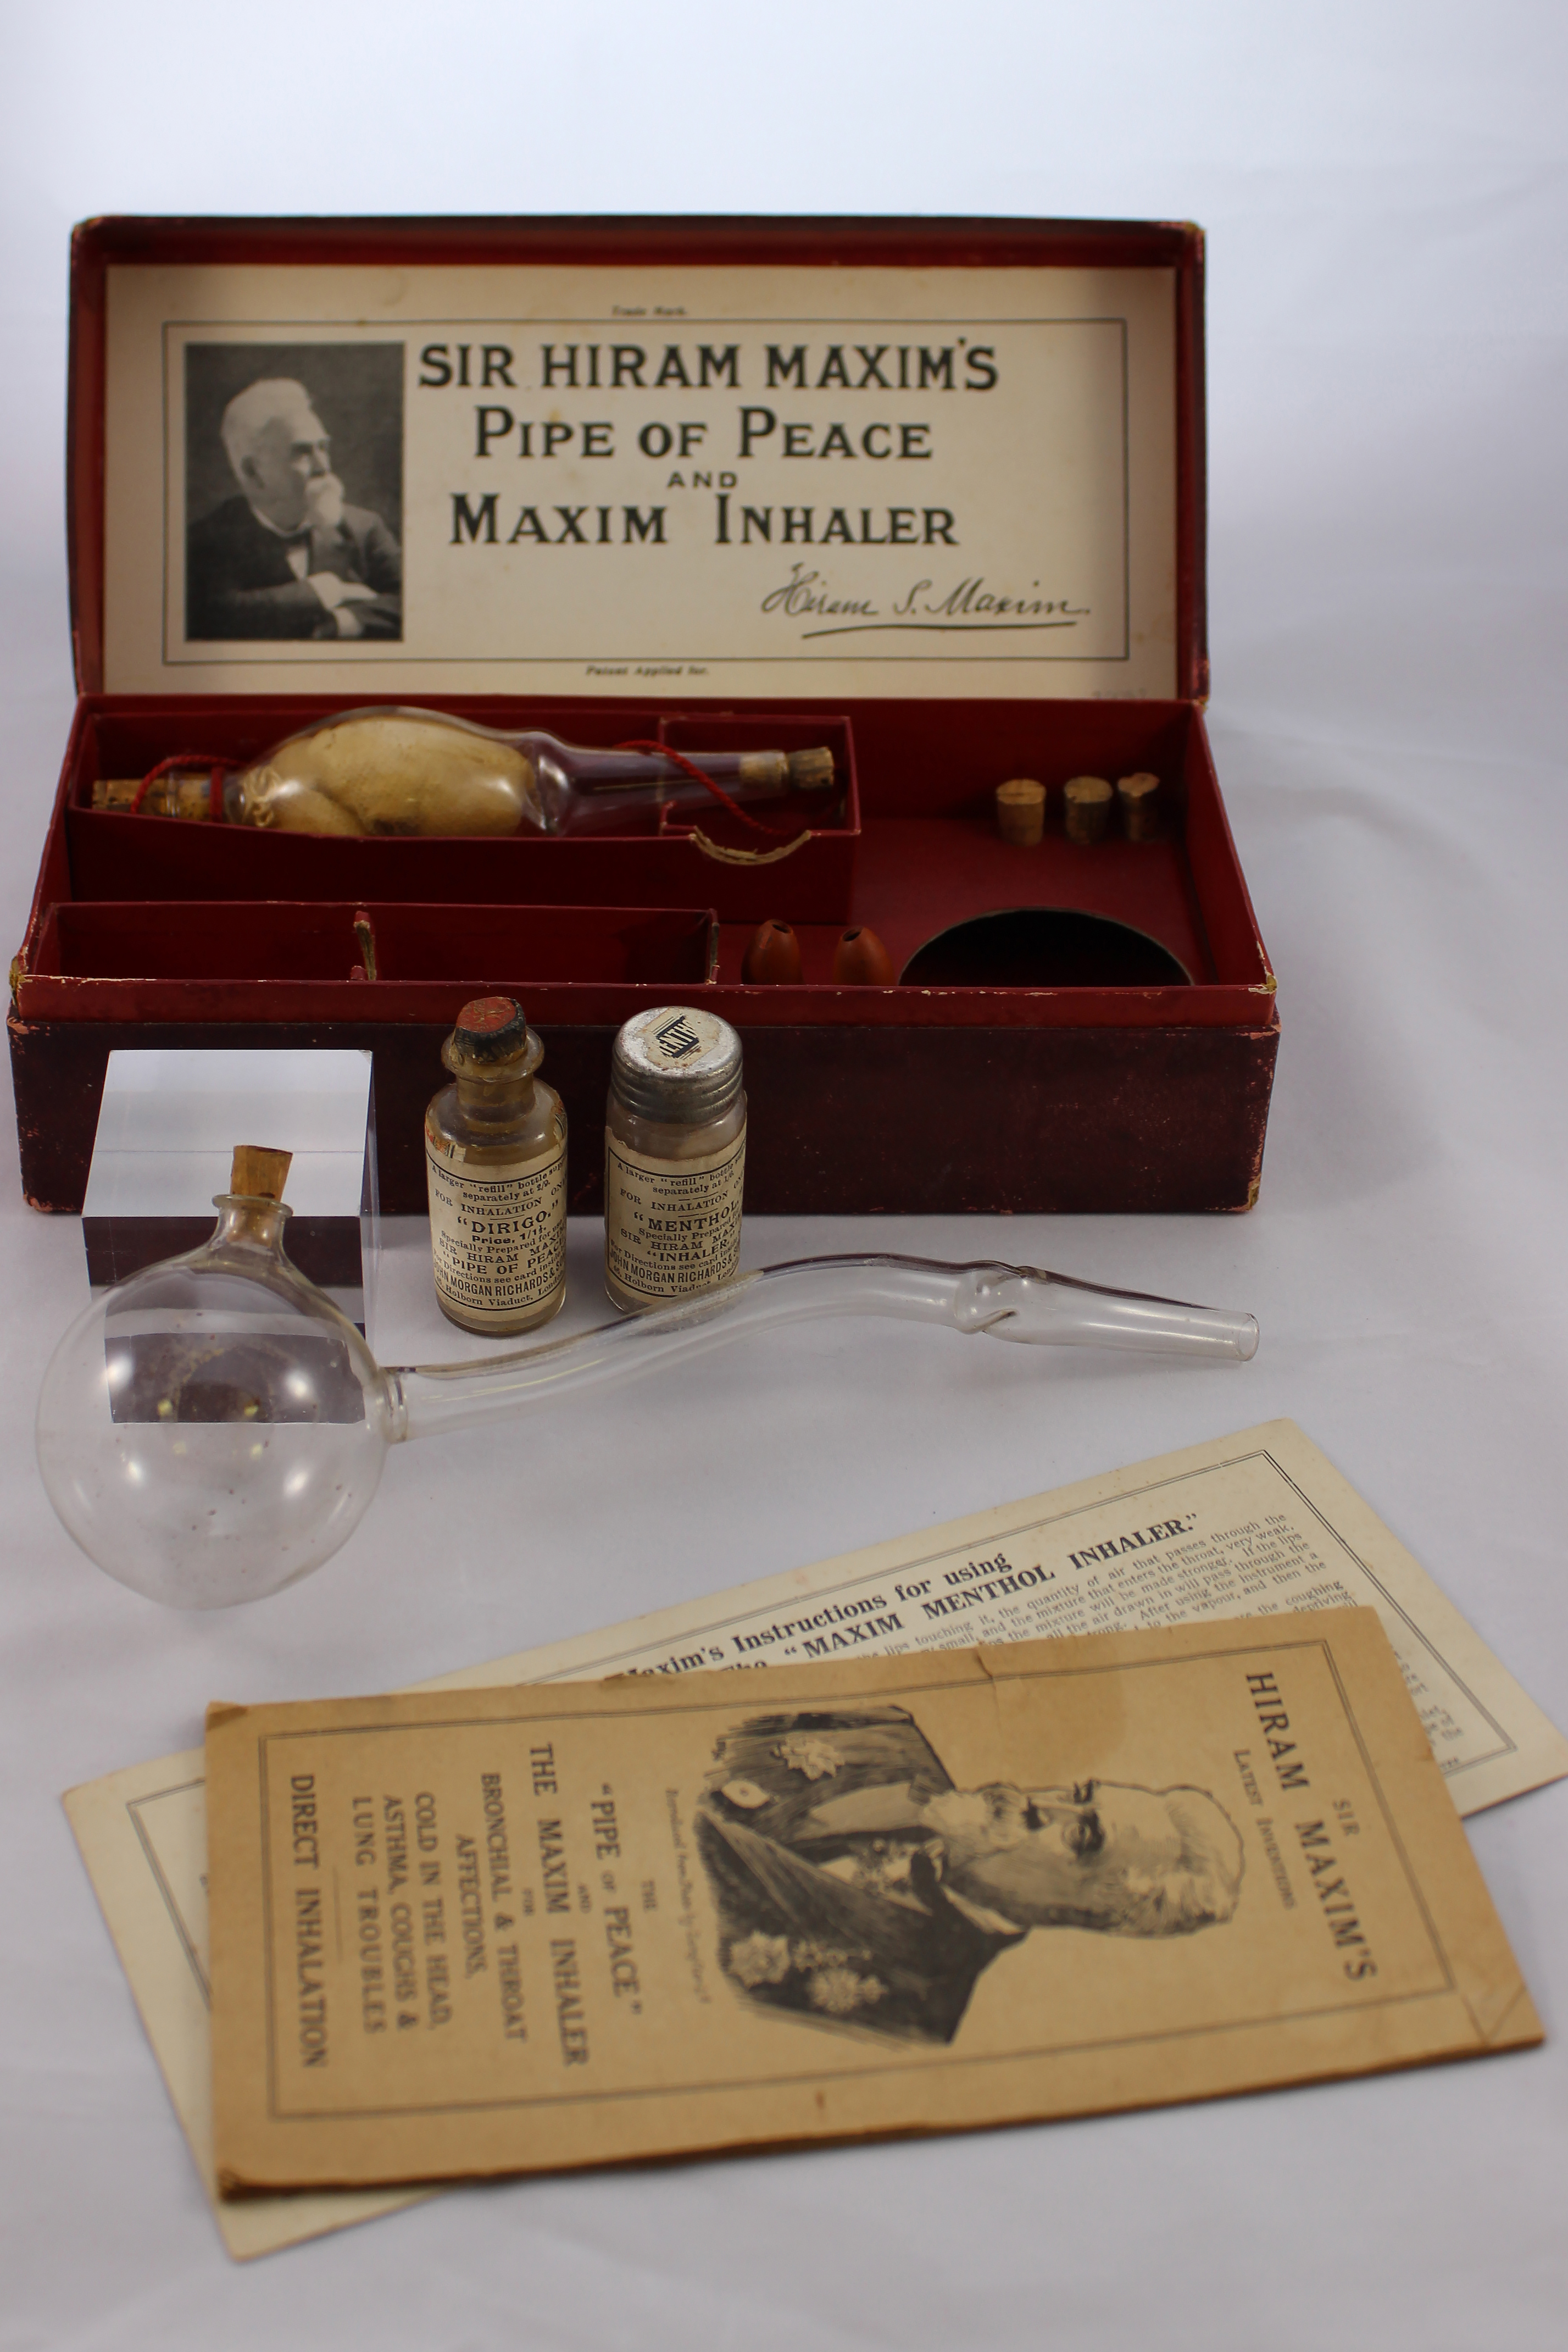 Pipe of Peace and Maxim inhaler and case.